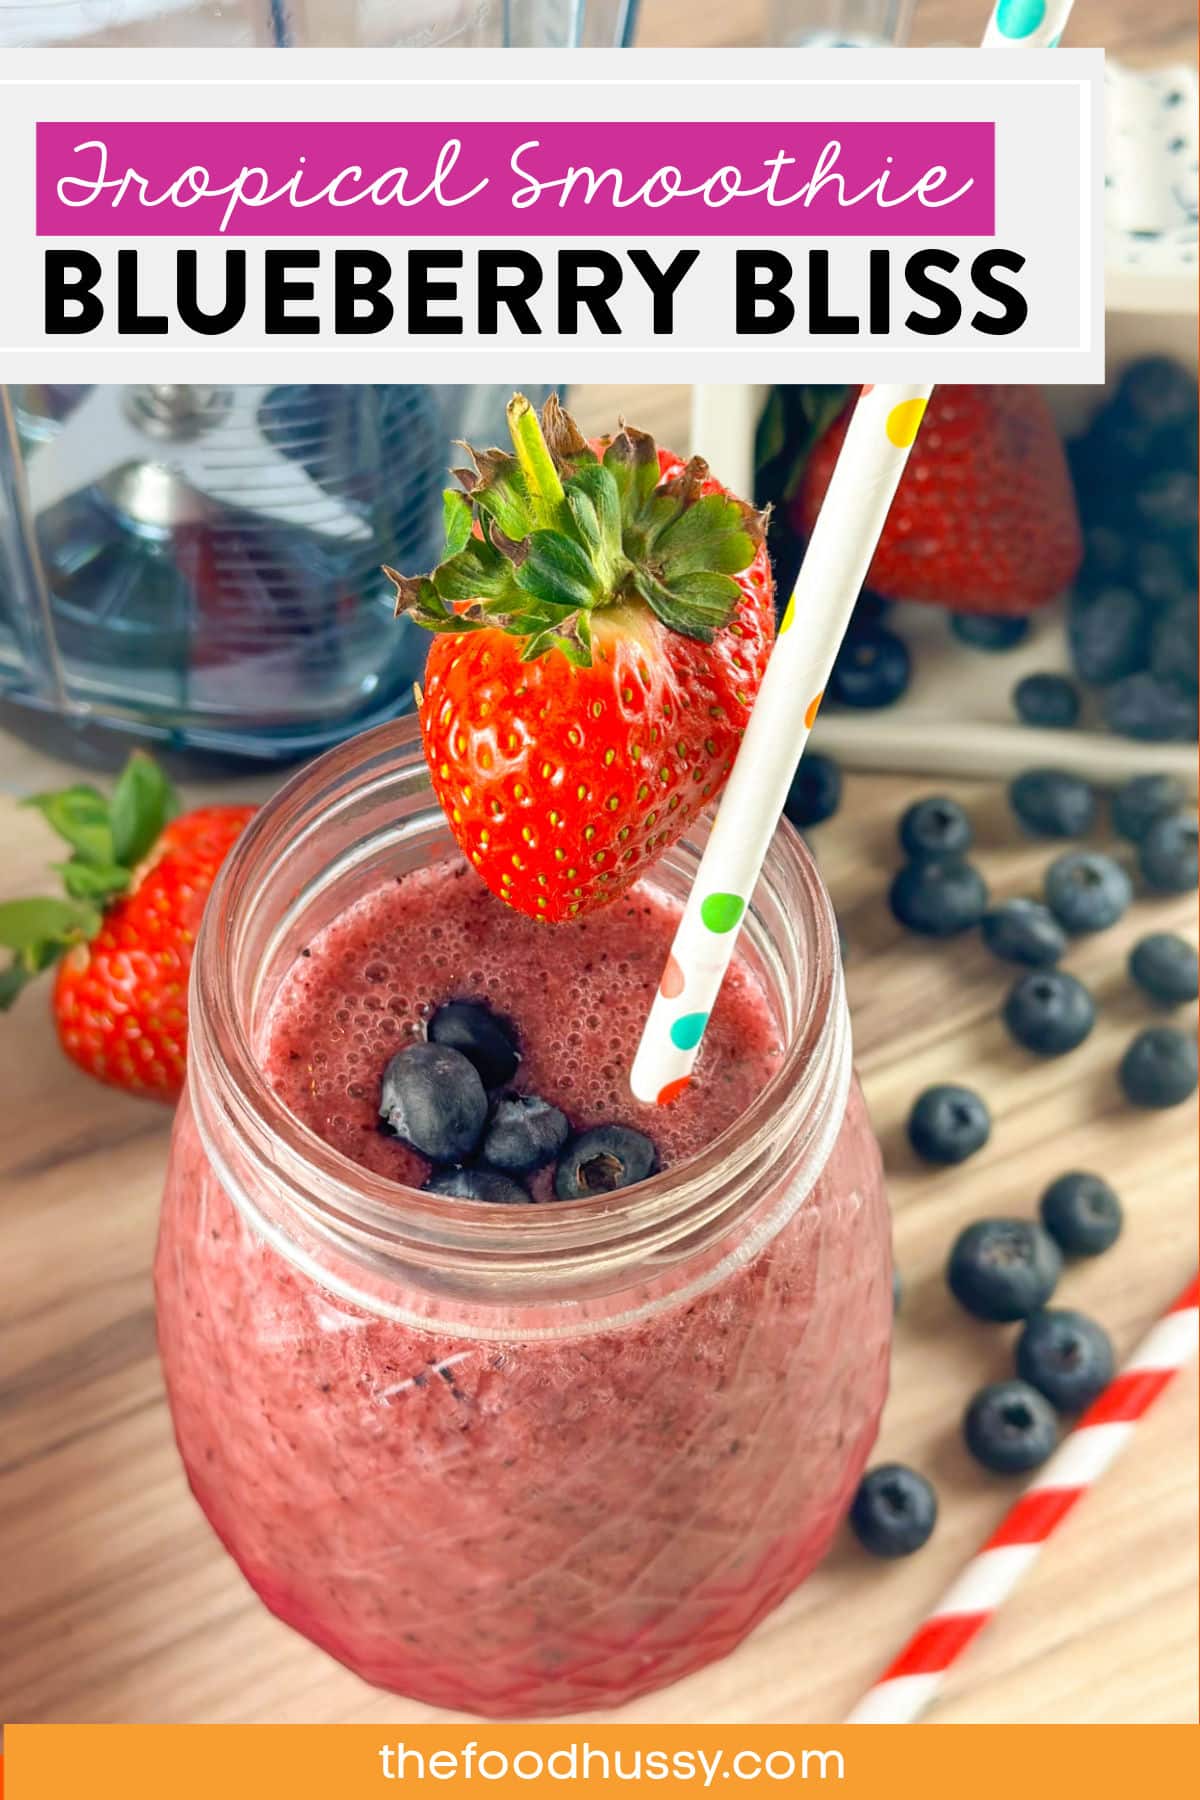 The Blueberry Bliss from Tropical Smoothie is a super healthy snack any time of day. Fresh fruit and a little sweetness is about all you'll find in this delicious smoothie! via @foodhussy